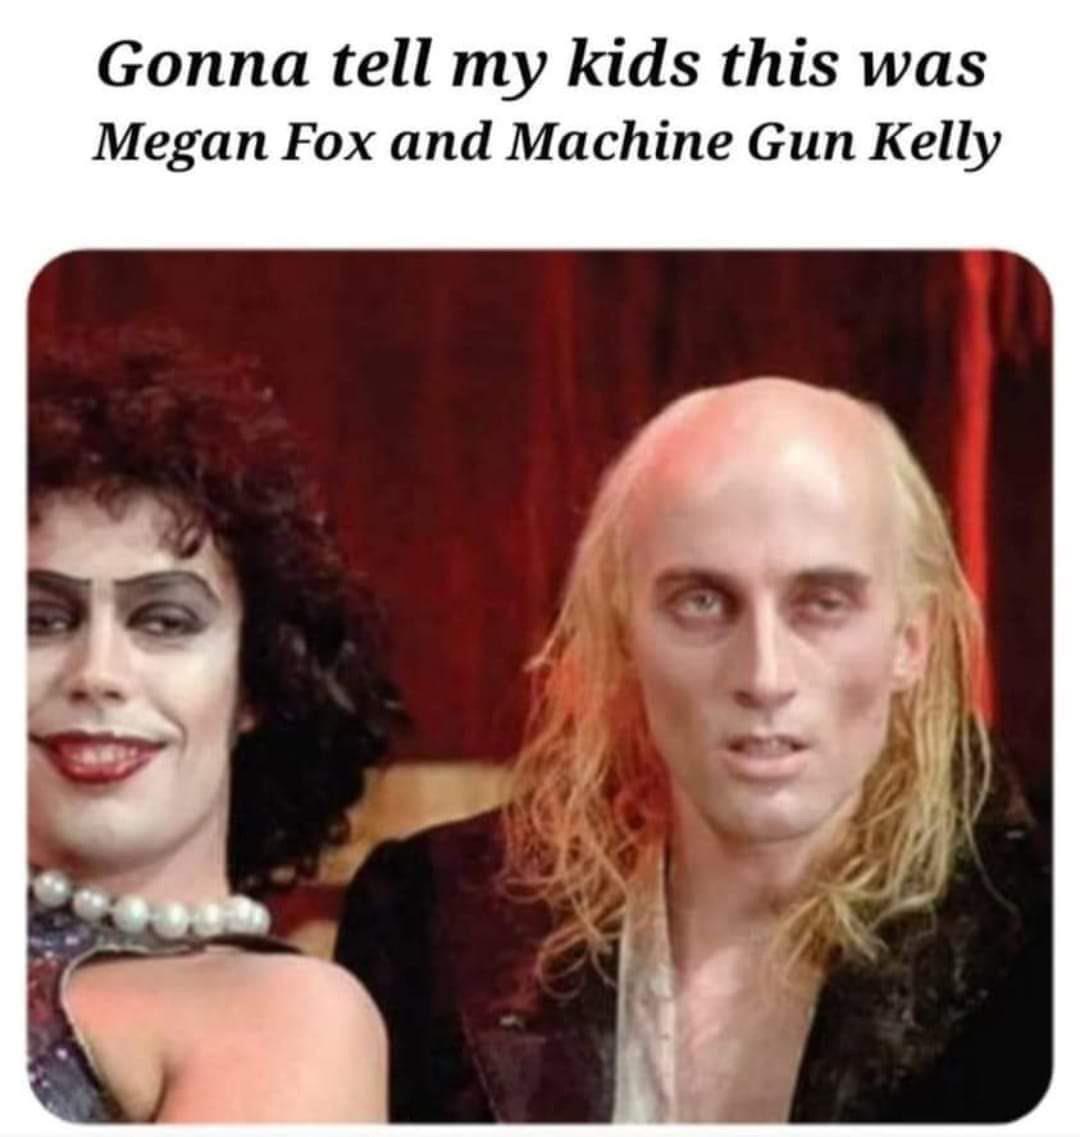 funny pics and memes - gonna tell my kids this was megan fox and machine gun kelly - Gonna tell my kids this was Megan Fox and Machine Gun Kelly